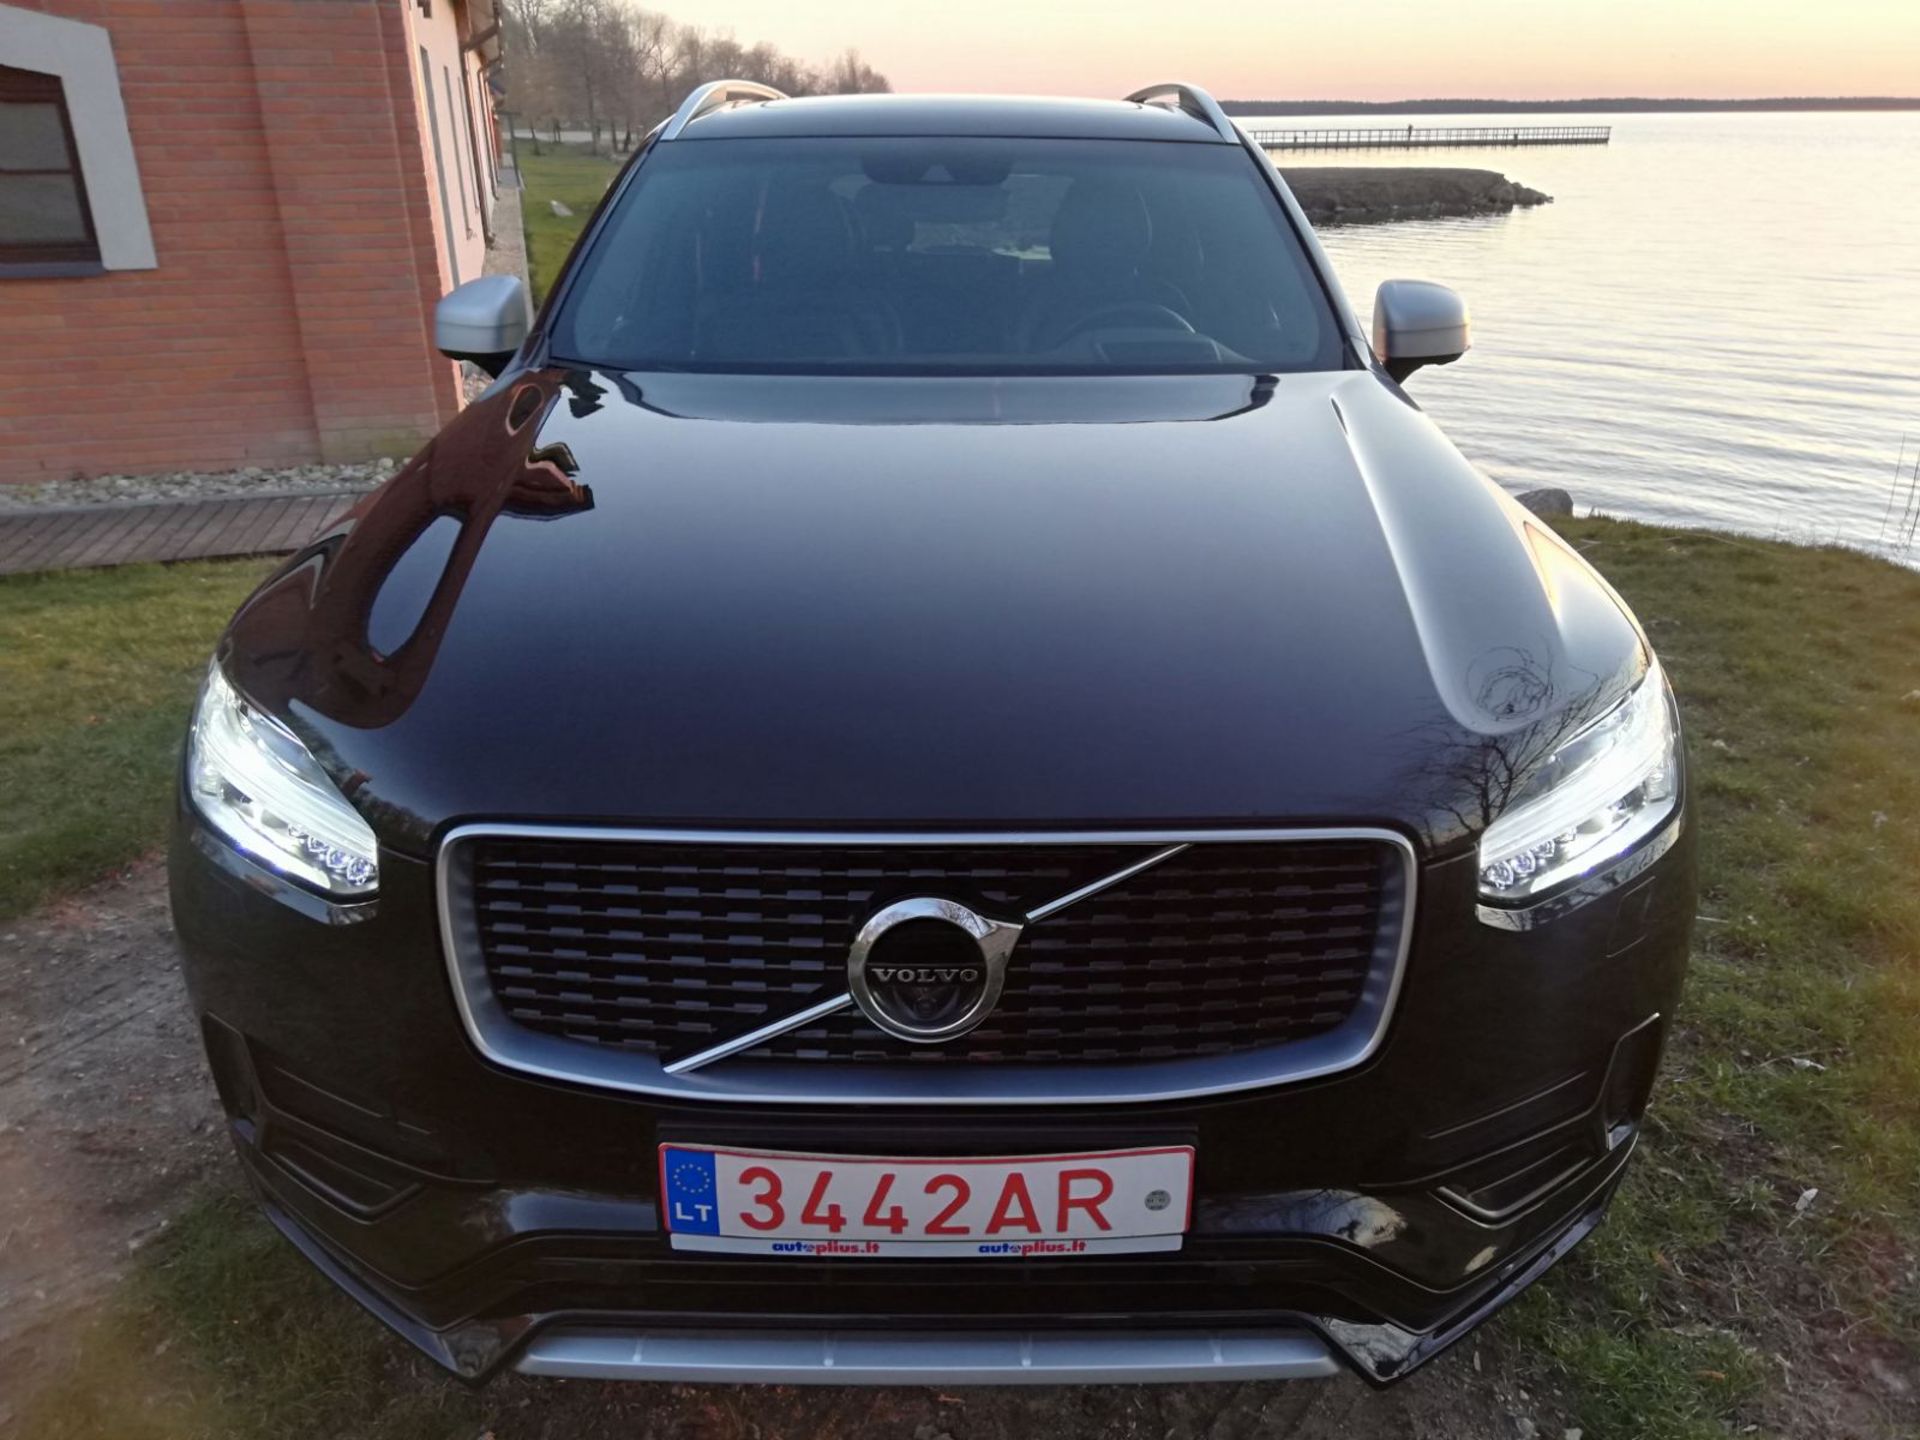 2017 VOLVO XC90 T6 AWD LEFT HAND DRIVE R-DESIGN 2.0L PETROL AUTOMATIC, 49,000 KM - Image 7 of 43